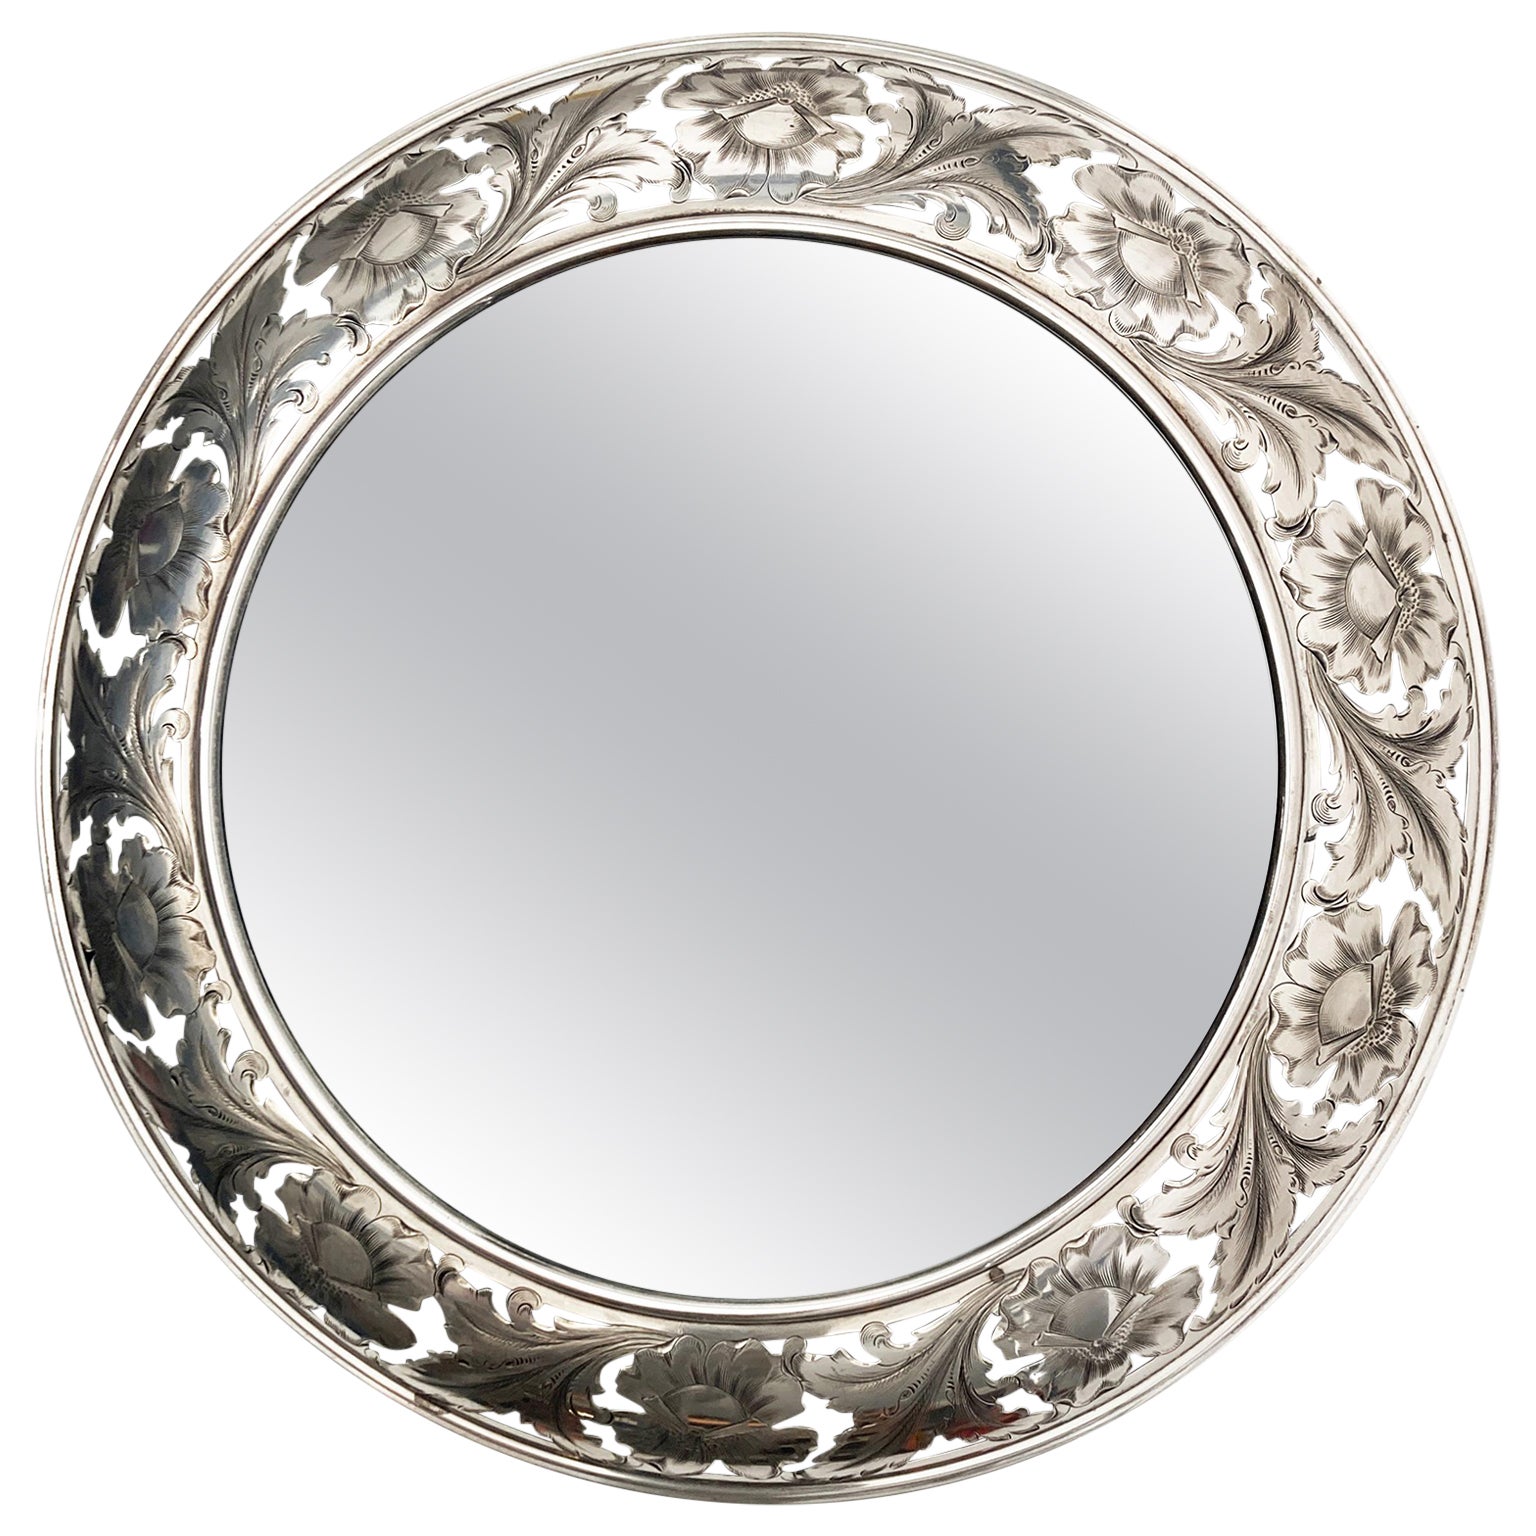 Early 20th Century Sterling Silver Circular Reticulated Mirror with Etched Folia